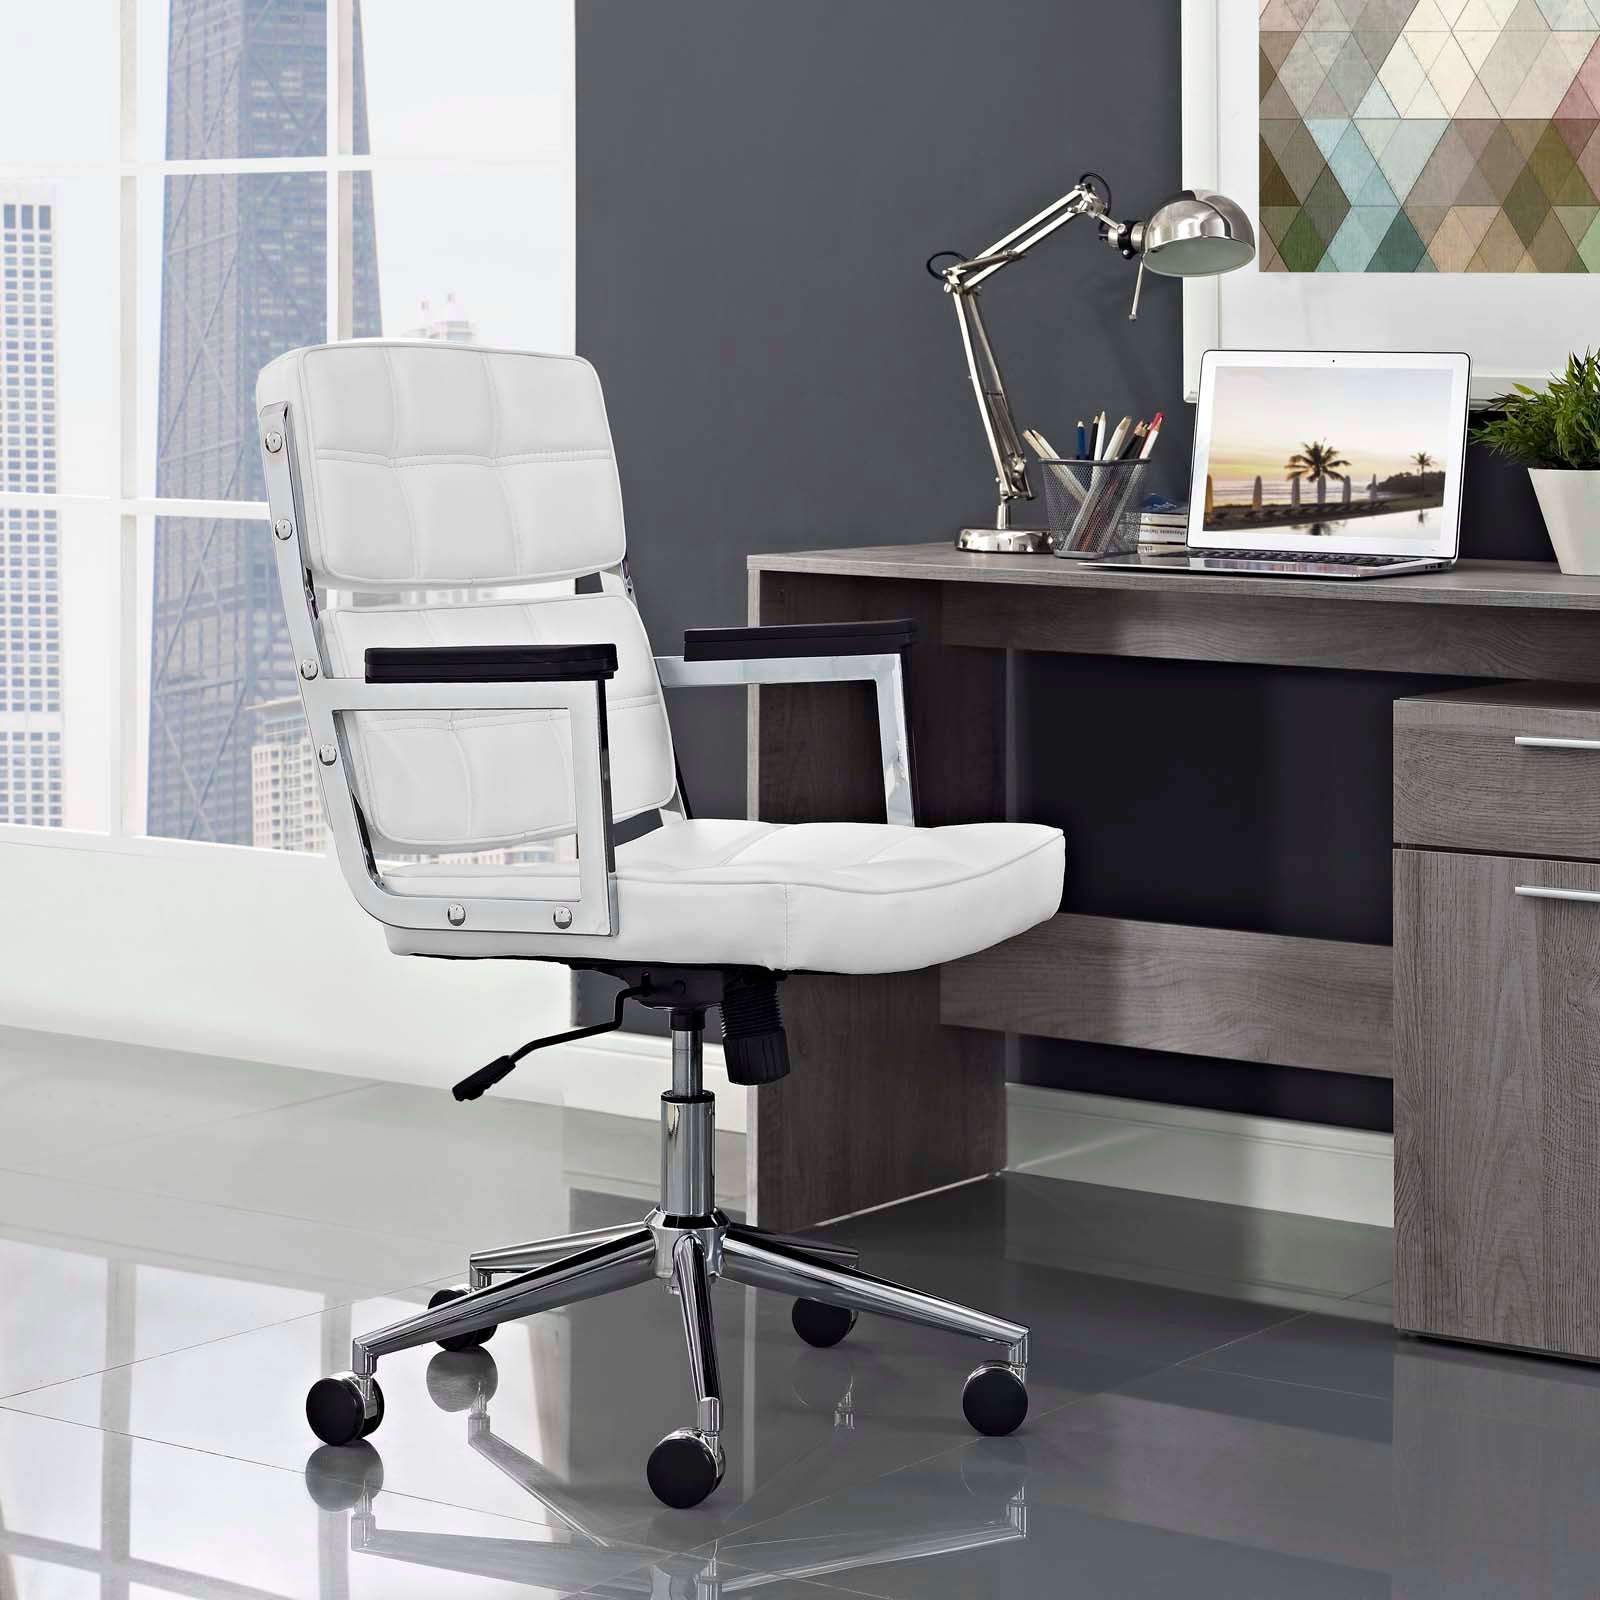 Modway Task Chairs - Portray Highback Upholstered Vinyl Office Chair White